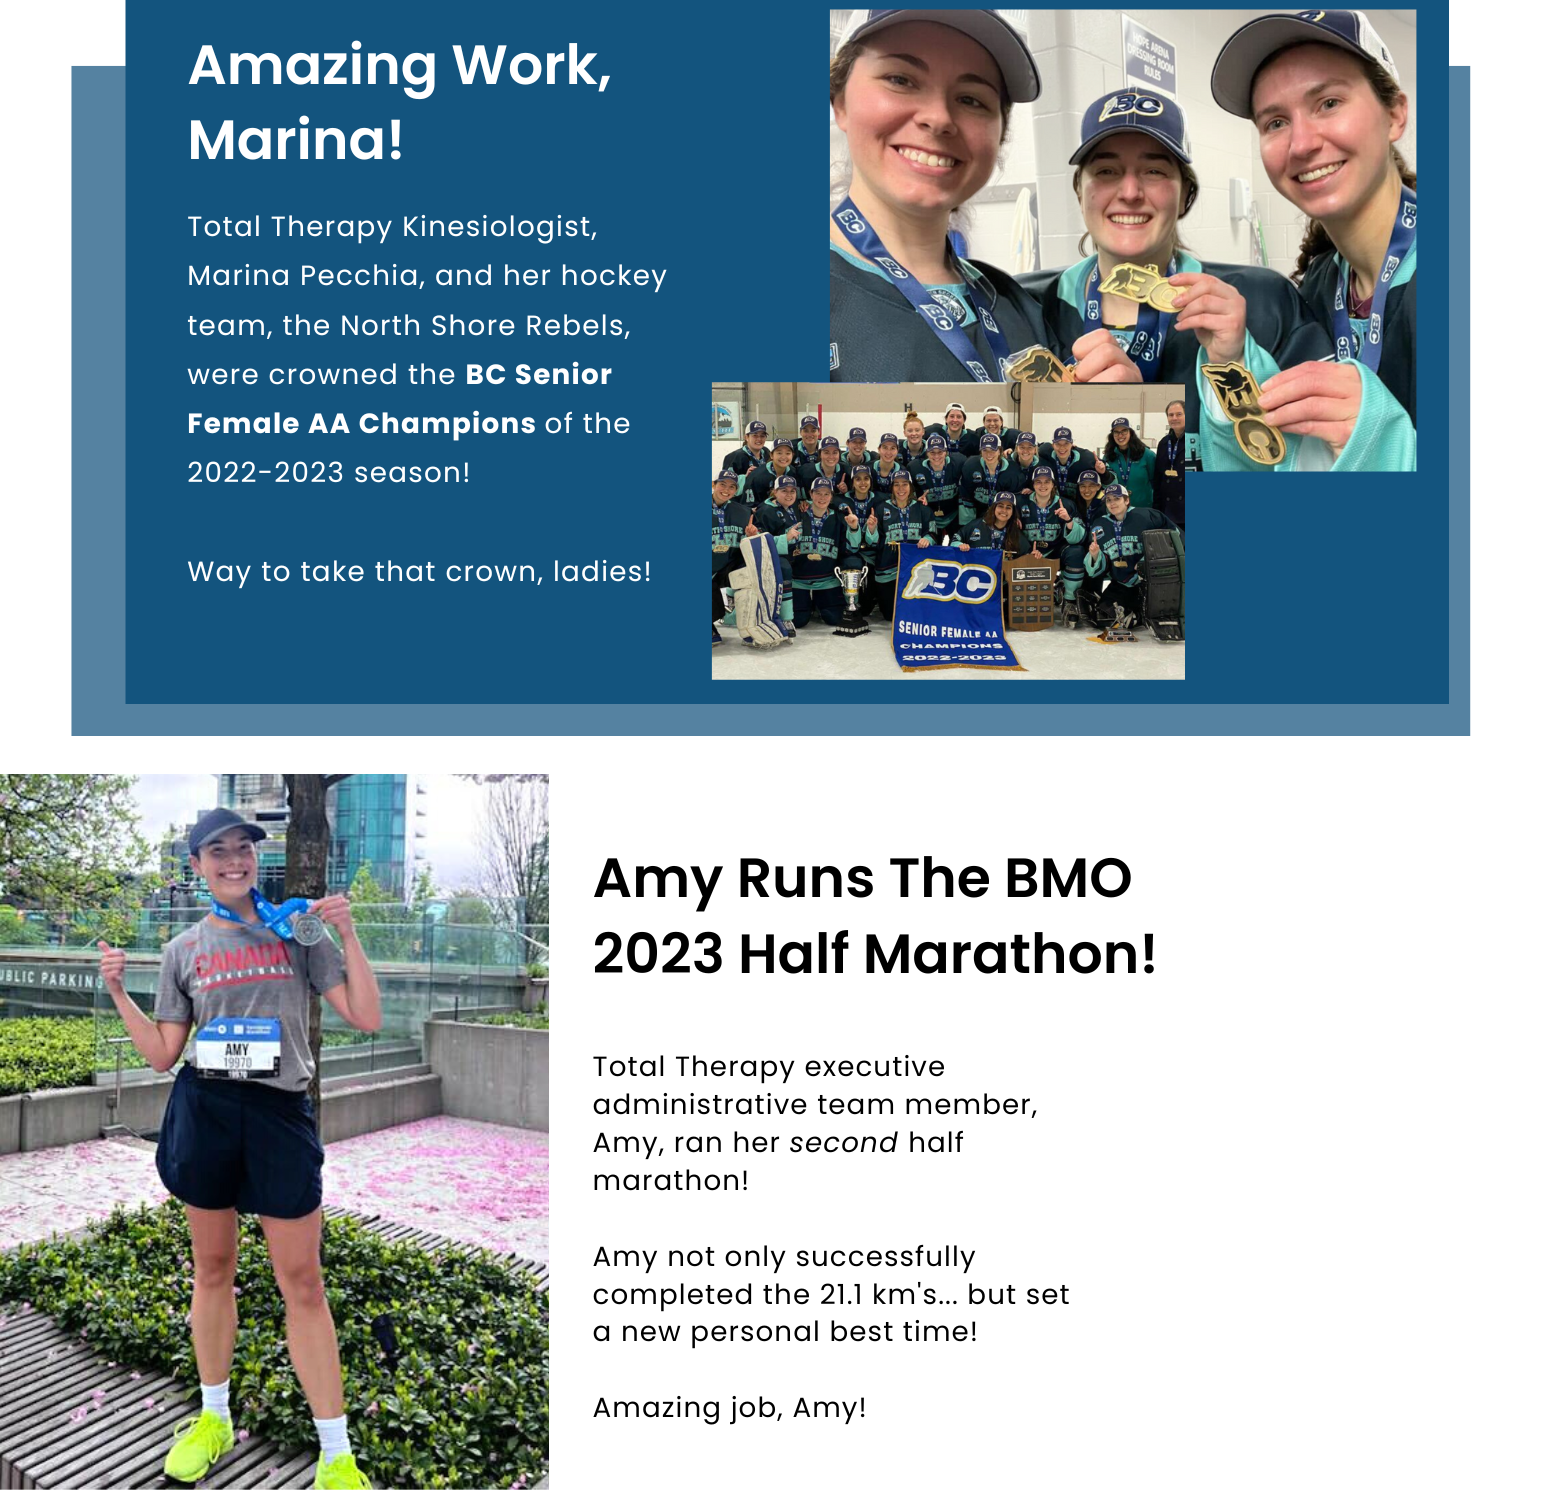 Amazing Work, Marina! Total Therapy Kinesiologist, Marina Pecchia, and her hockey team, the North Shore Rebels, were crowned the BC Senior Female AA Champions of the 2022-2023 season! Way to take that crown, ladies! Amy Runs The BMO 2023 Half Marathon! Total Therapy executive administrative team member, Amy, ran her second half marathon! Amy not only successfully completed the 21.1 km's... but set a new personal best time! Amazing job, Amy!